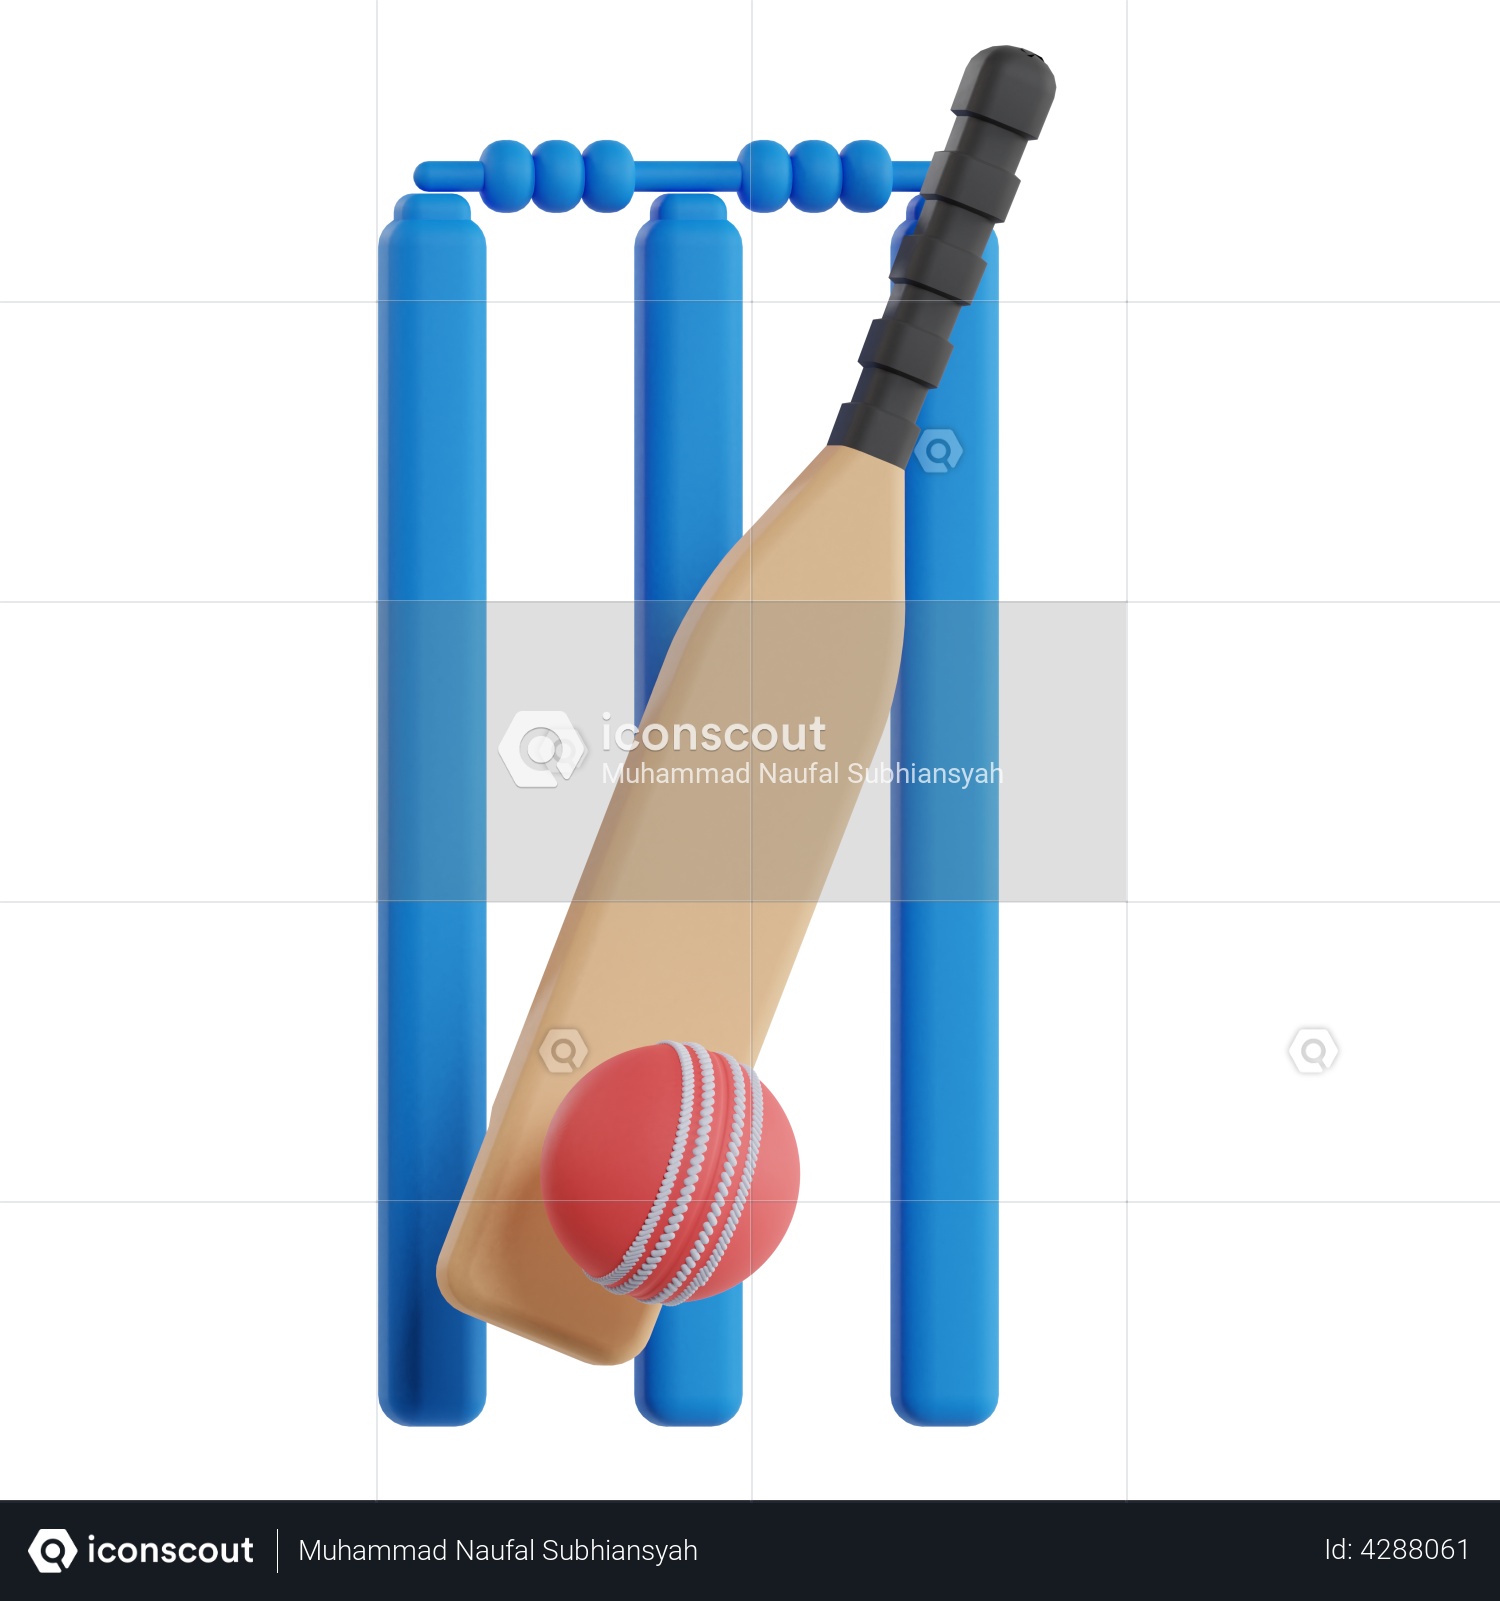 Pencil Sketch - 3D composition using cricket bat and wickets | Bat sketch,  Object drawing, Amazing food art